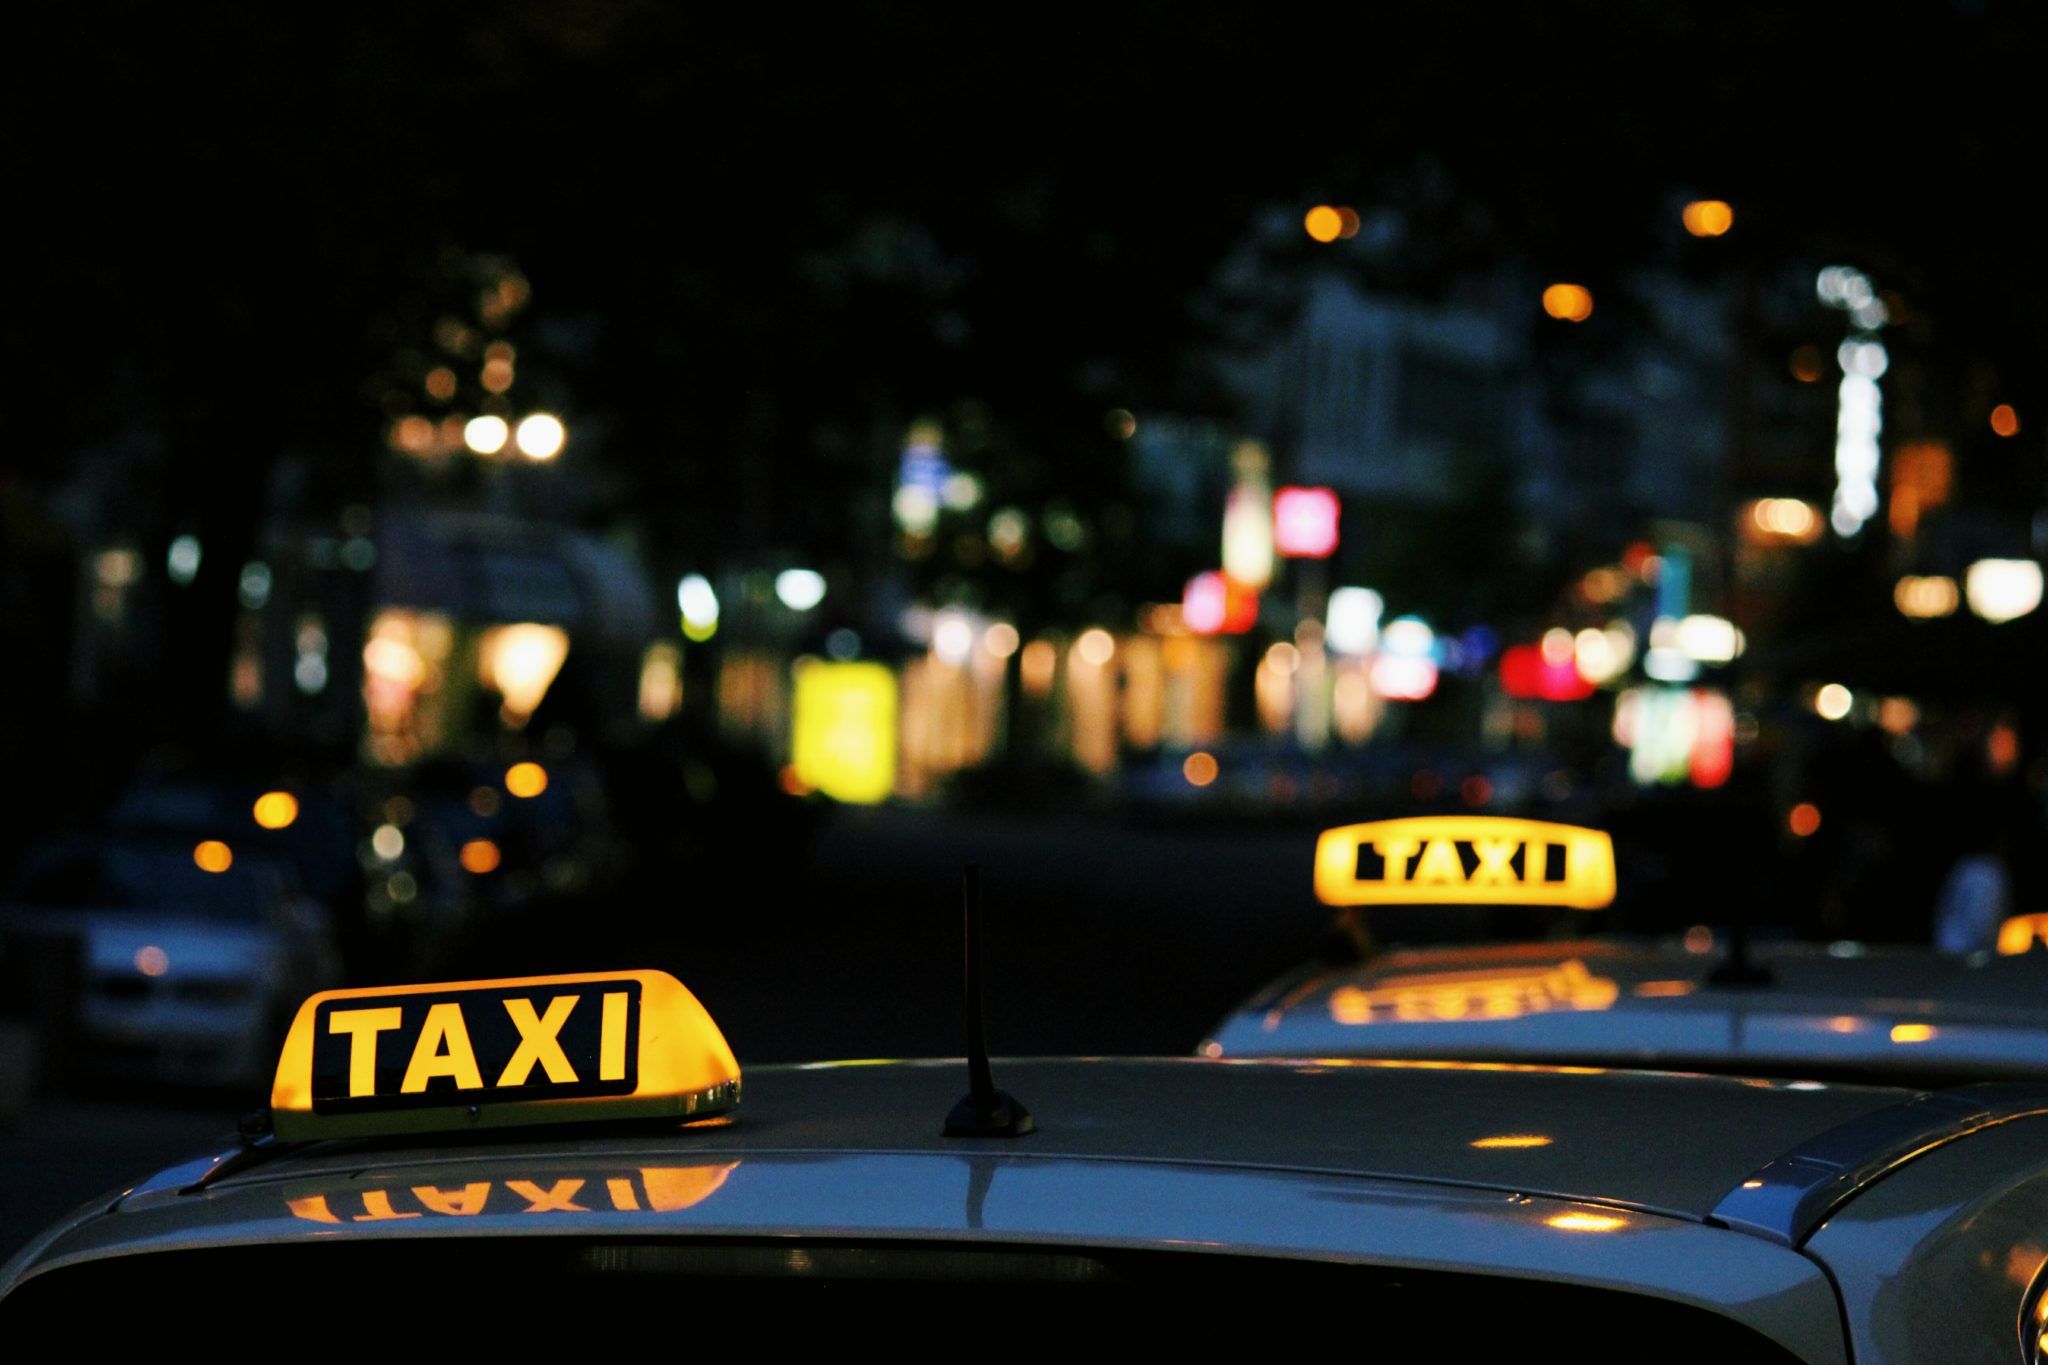 New ‘technology fee’ for all FREE NOW taxi trips coming in August